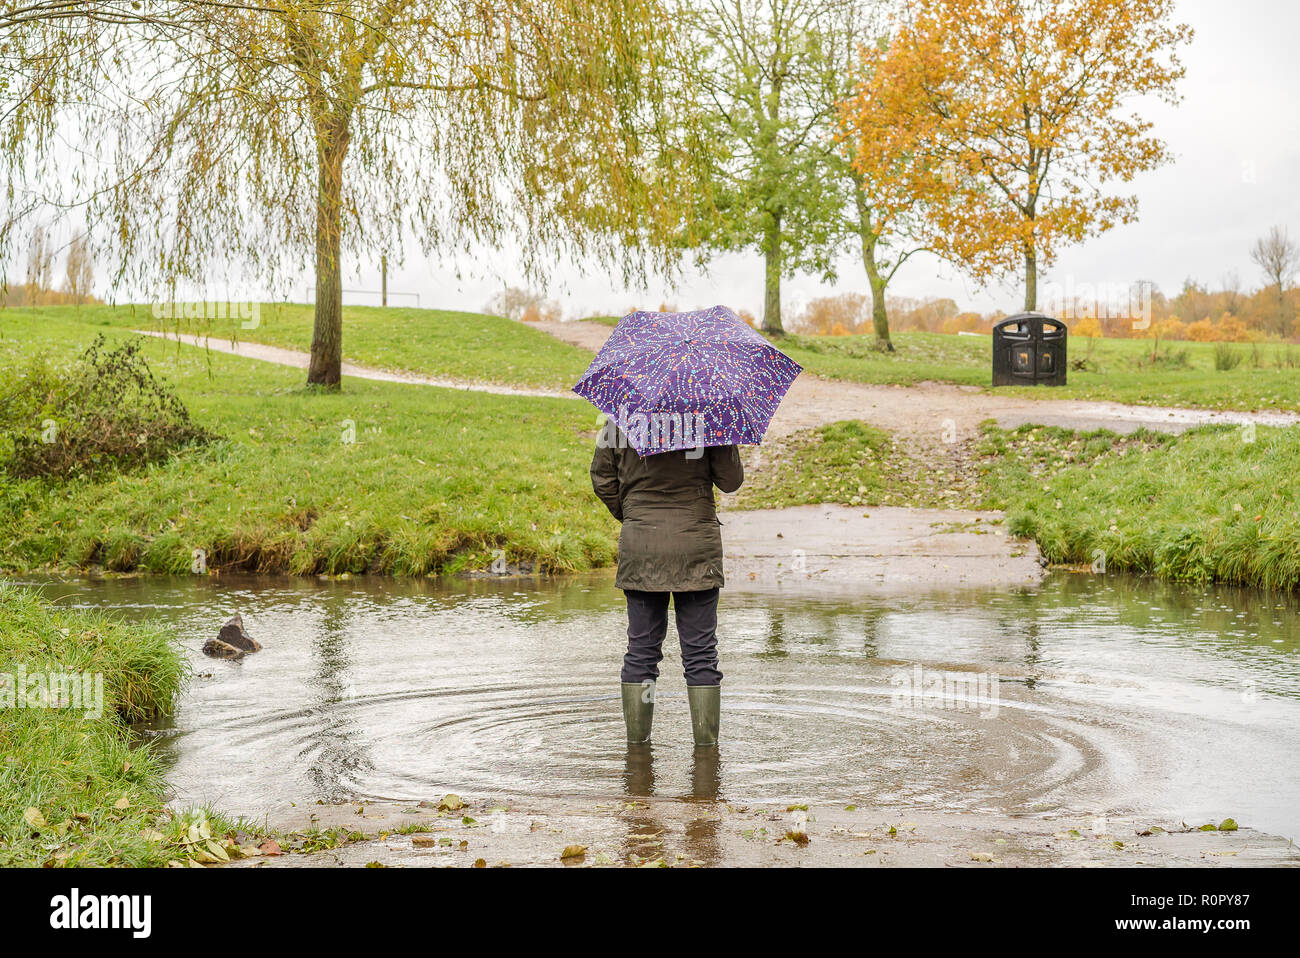 Kidderminster, UK. 7th November, 2018. UK weather: with today's persistent heavy showers (coupled with the significant overnight downpour), water levels are on the rise in Worcestershire with some areas experiencing flash flooding. A woman wearing wellies and holding an umbrella stands outdoors, rear view, isolated in rising water. Credit: Lee Hudson/Alamy Live News Stock Photo